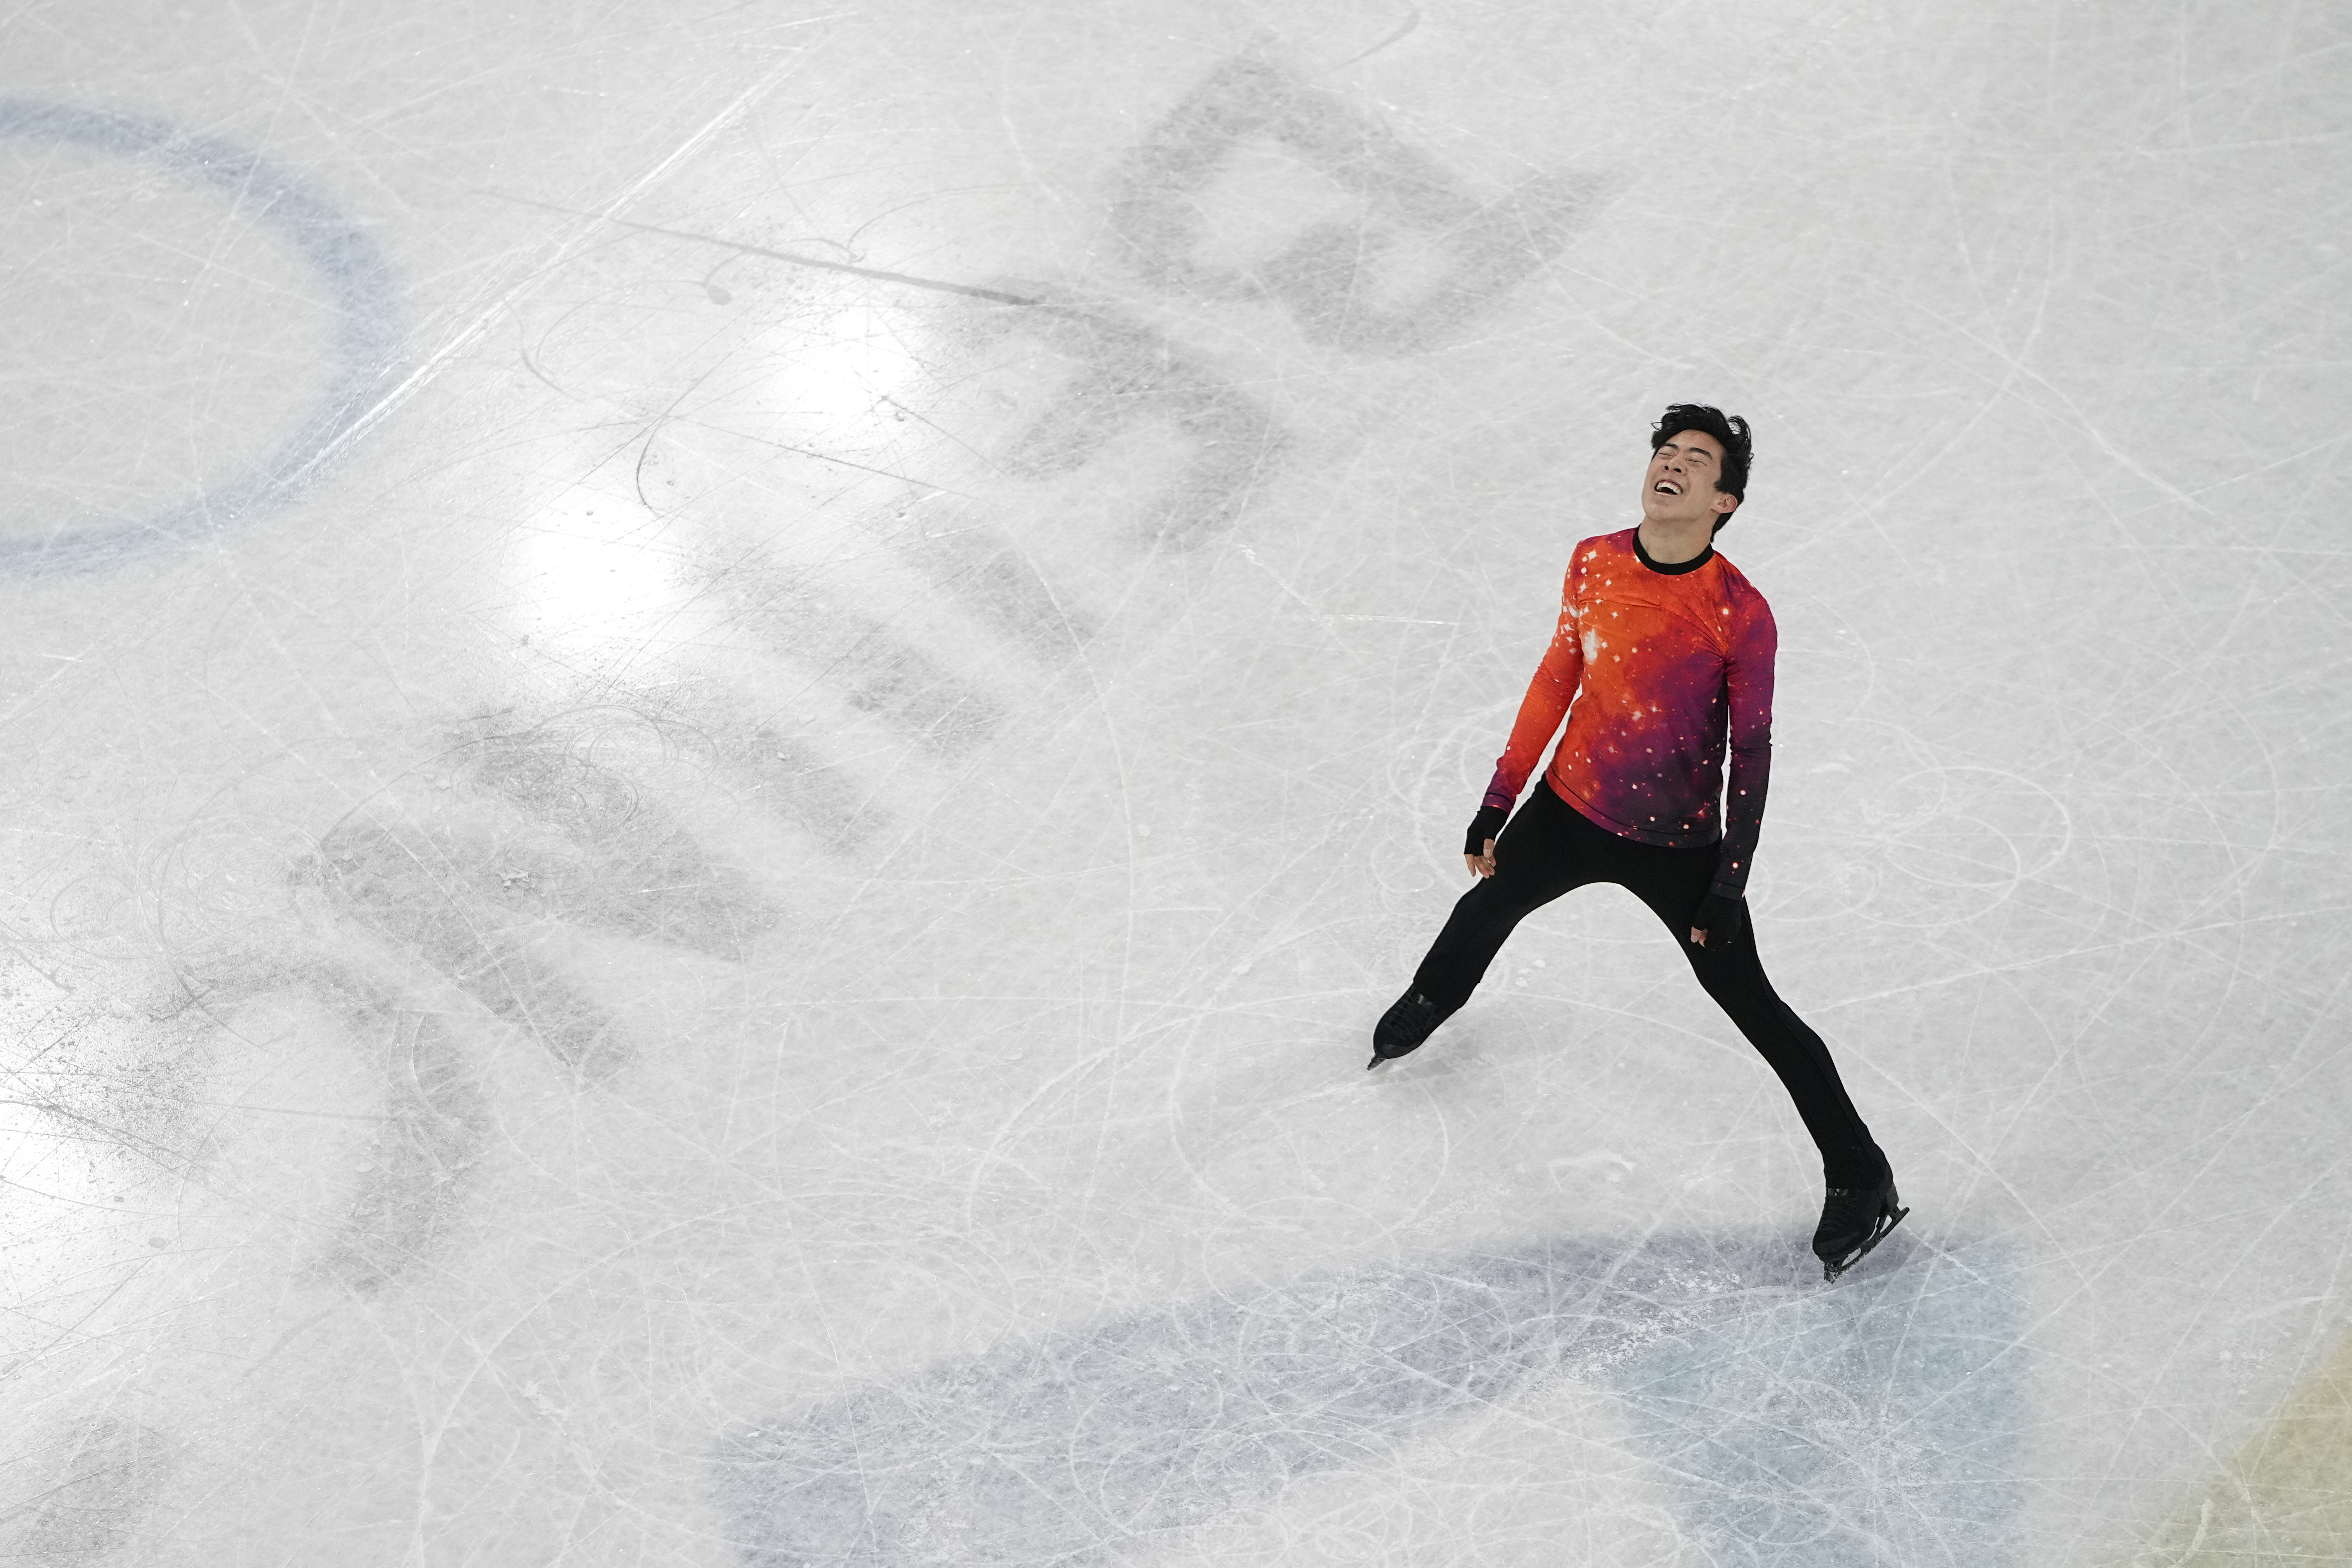 Watch: Nathan Chens Gold Medal-Winning Free Skate